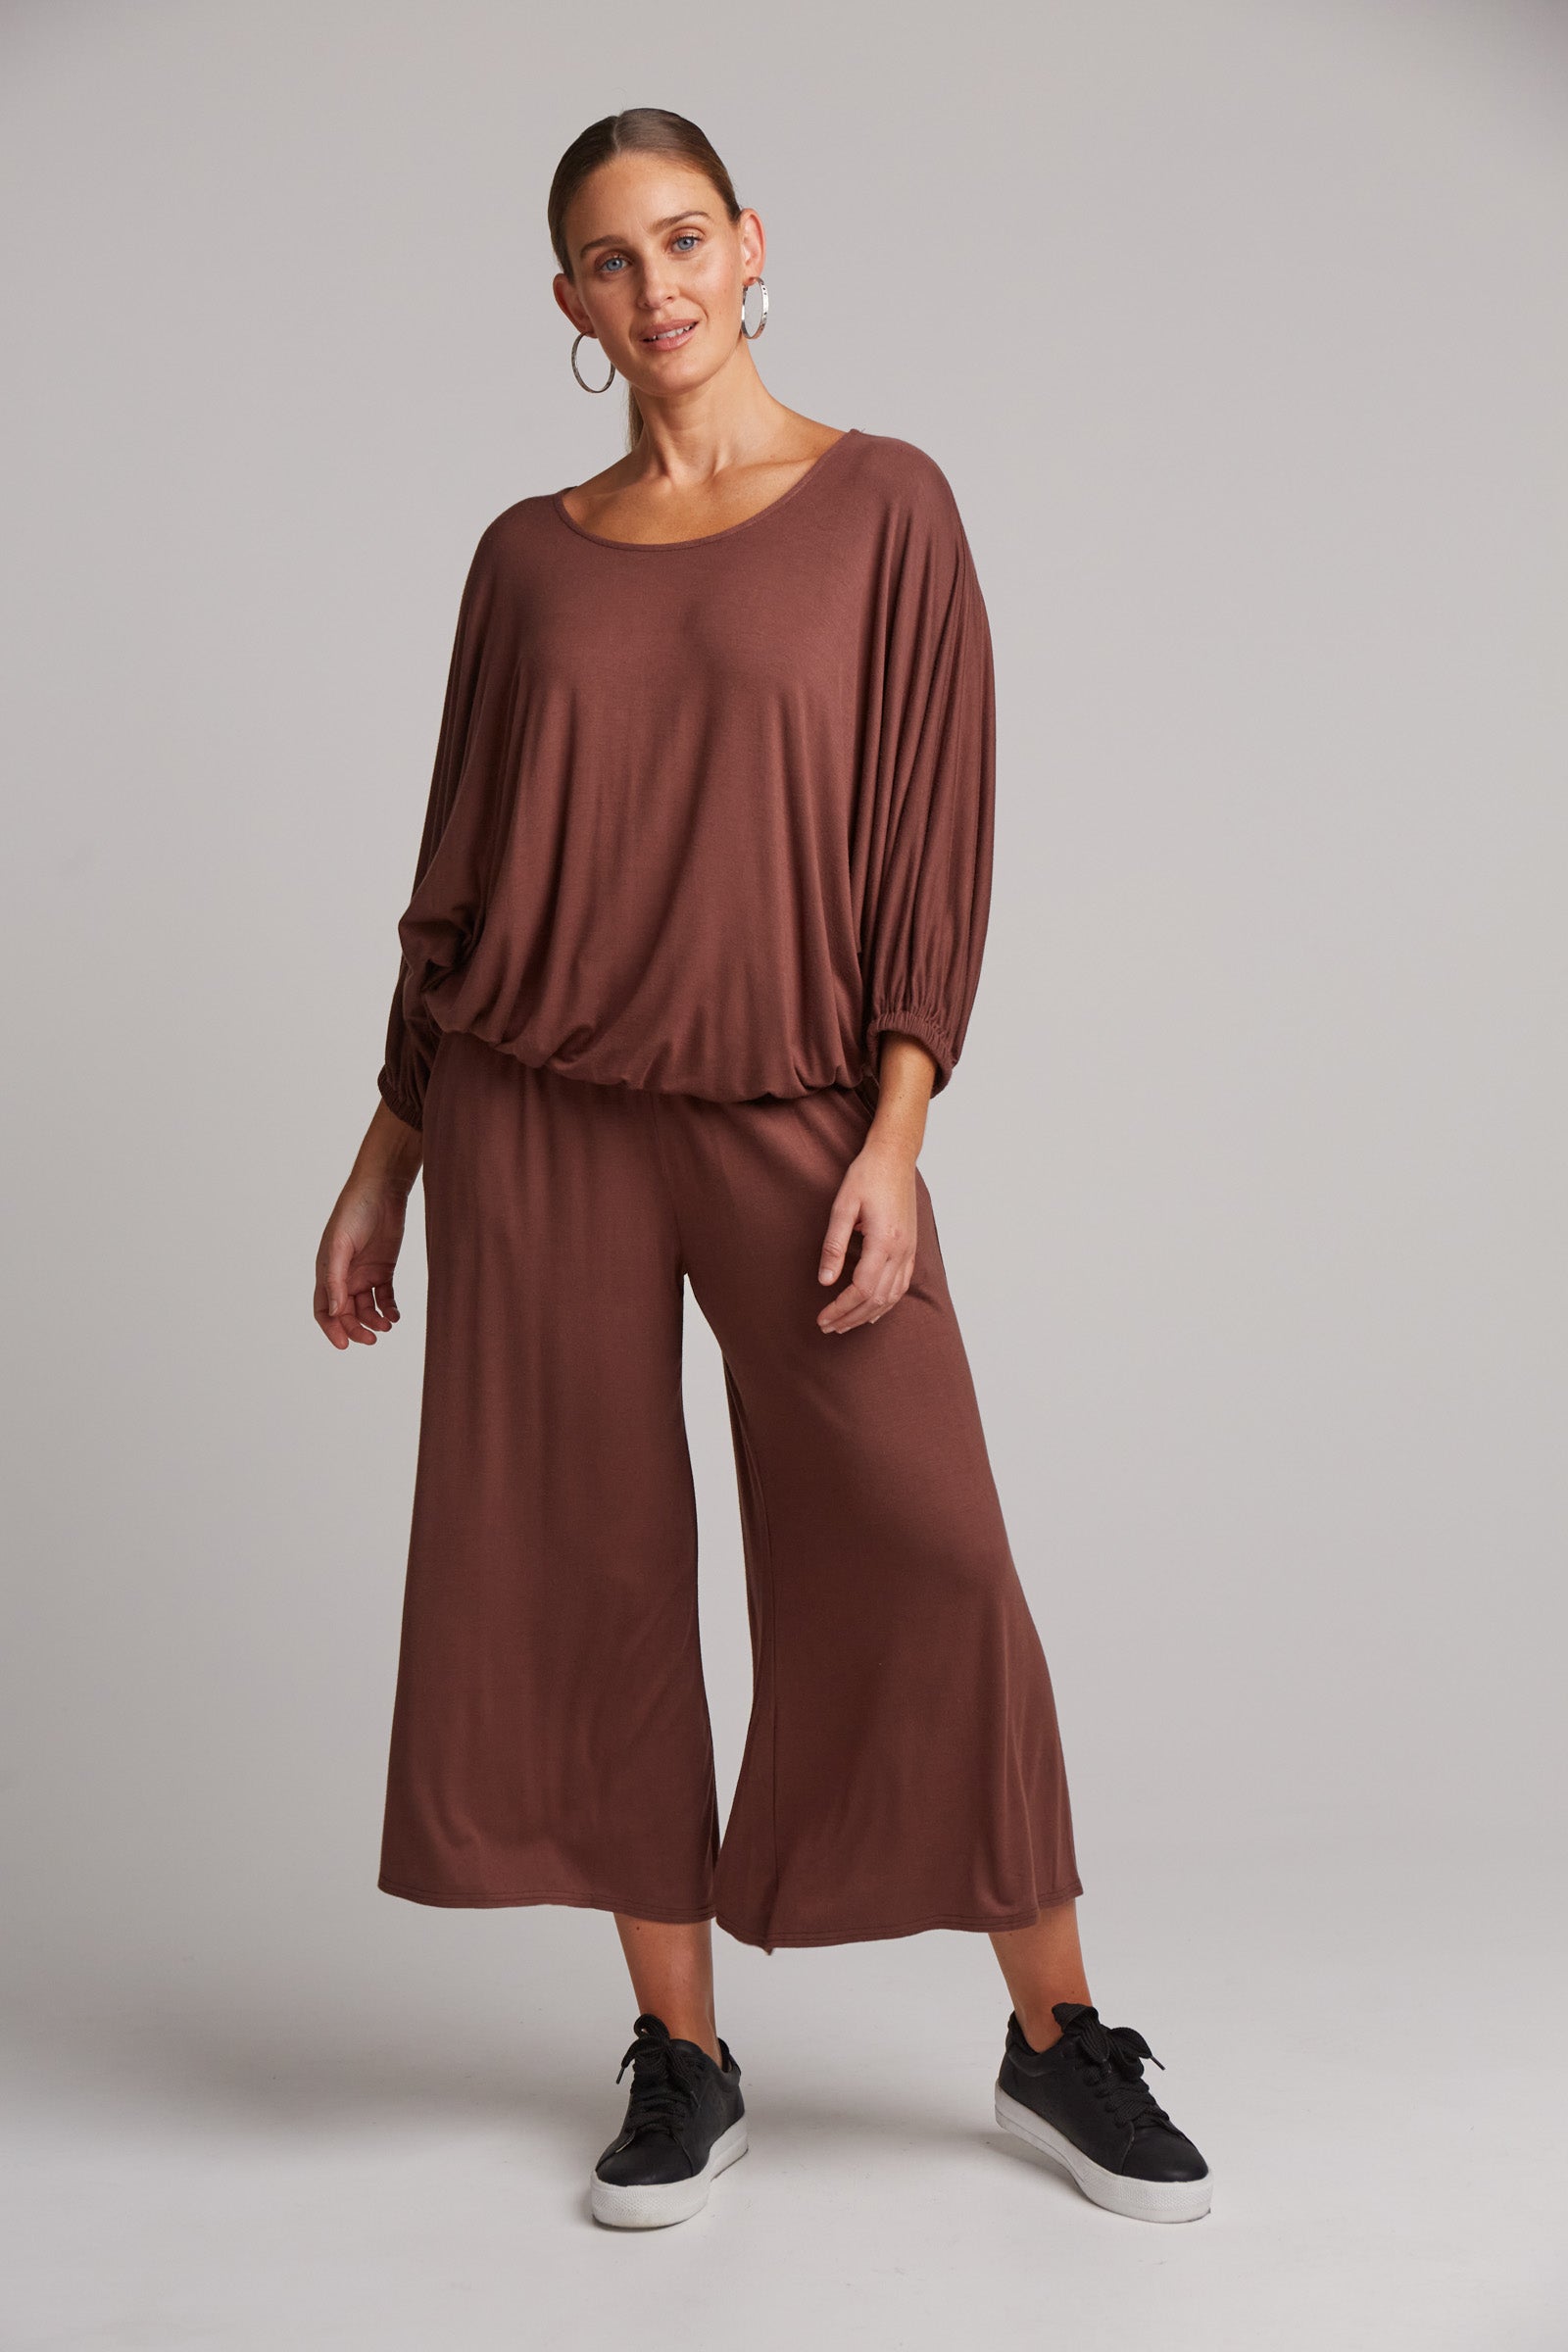 Studio Jersey Relaxed Top - Mocha - eb&ive Clothing - Top 3/4 Sleeve Jersey